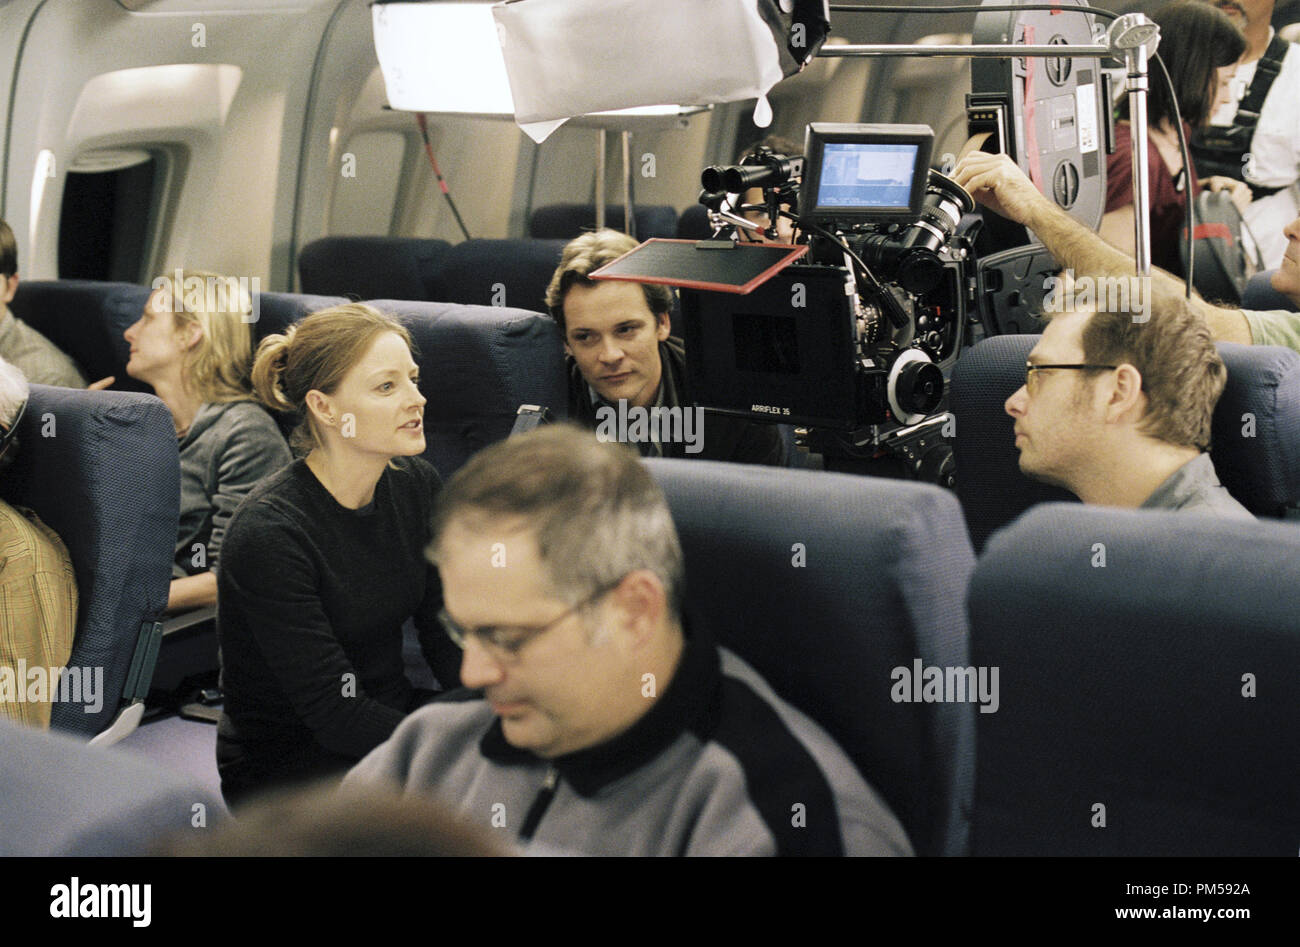 Studio Publicity Still from 'Flightplan' Jodie Foster, Peter Sarsgaard, Director Robert Schwentke © 2005 Touchstone Pictures Photo by Ron Batzdorff   File Reference # 307362071THA  For Editorial Use Only -  All Rights Reserved Stock Photo